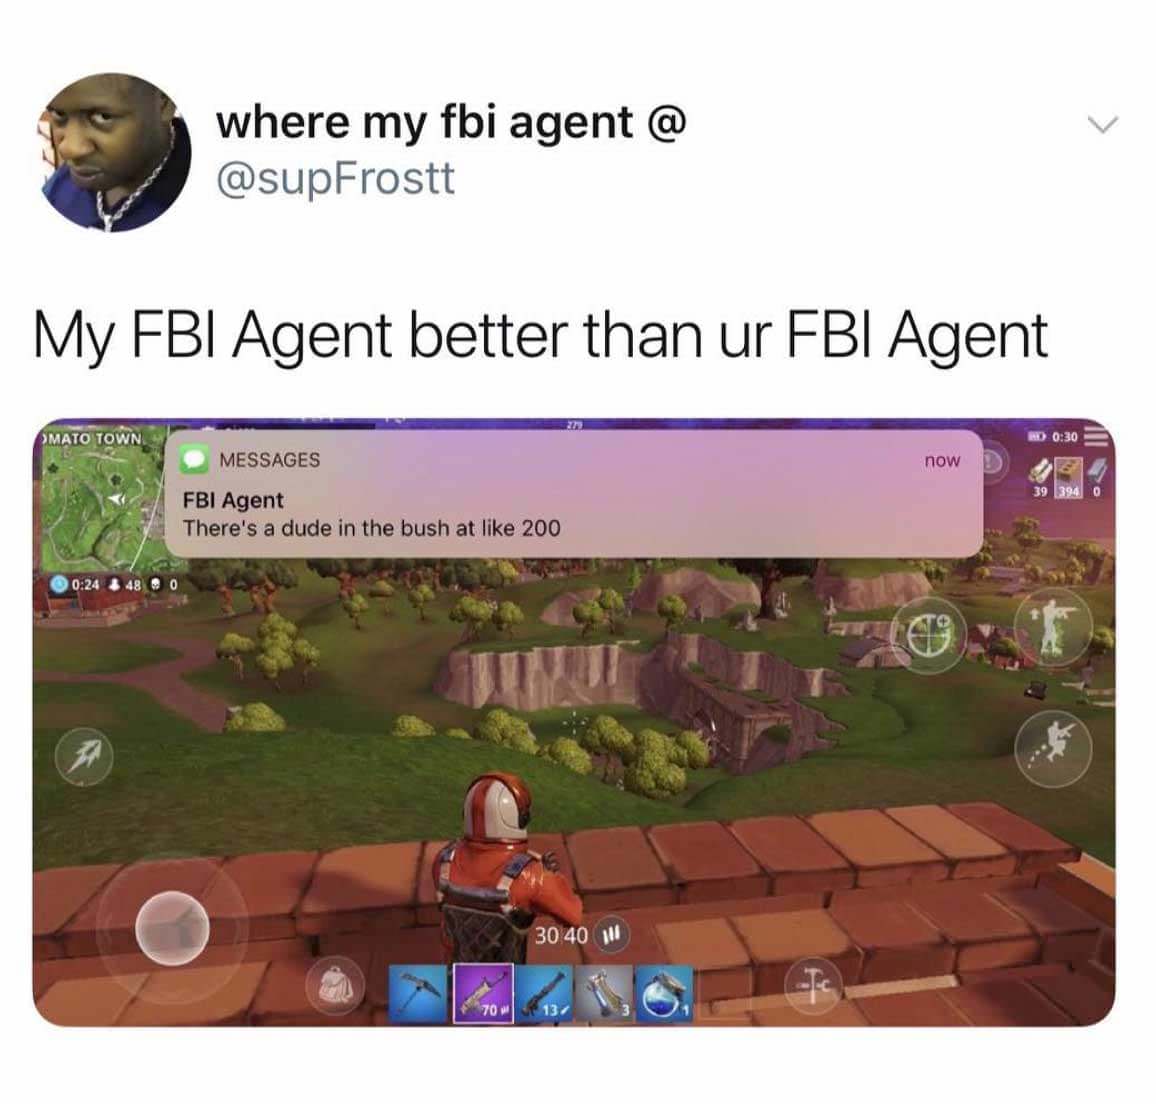 my fbi agent is better than yours - where my fbi agent @ My Fbi Agent better than ur Fbi Agent >Mato Town D Messages now 39 Fbi Agent There's a dude in the bush at 200 30 40 116